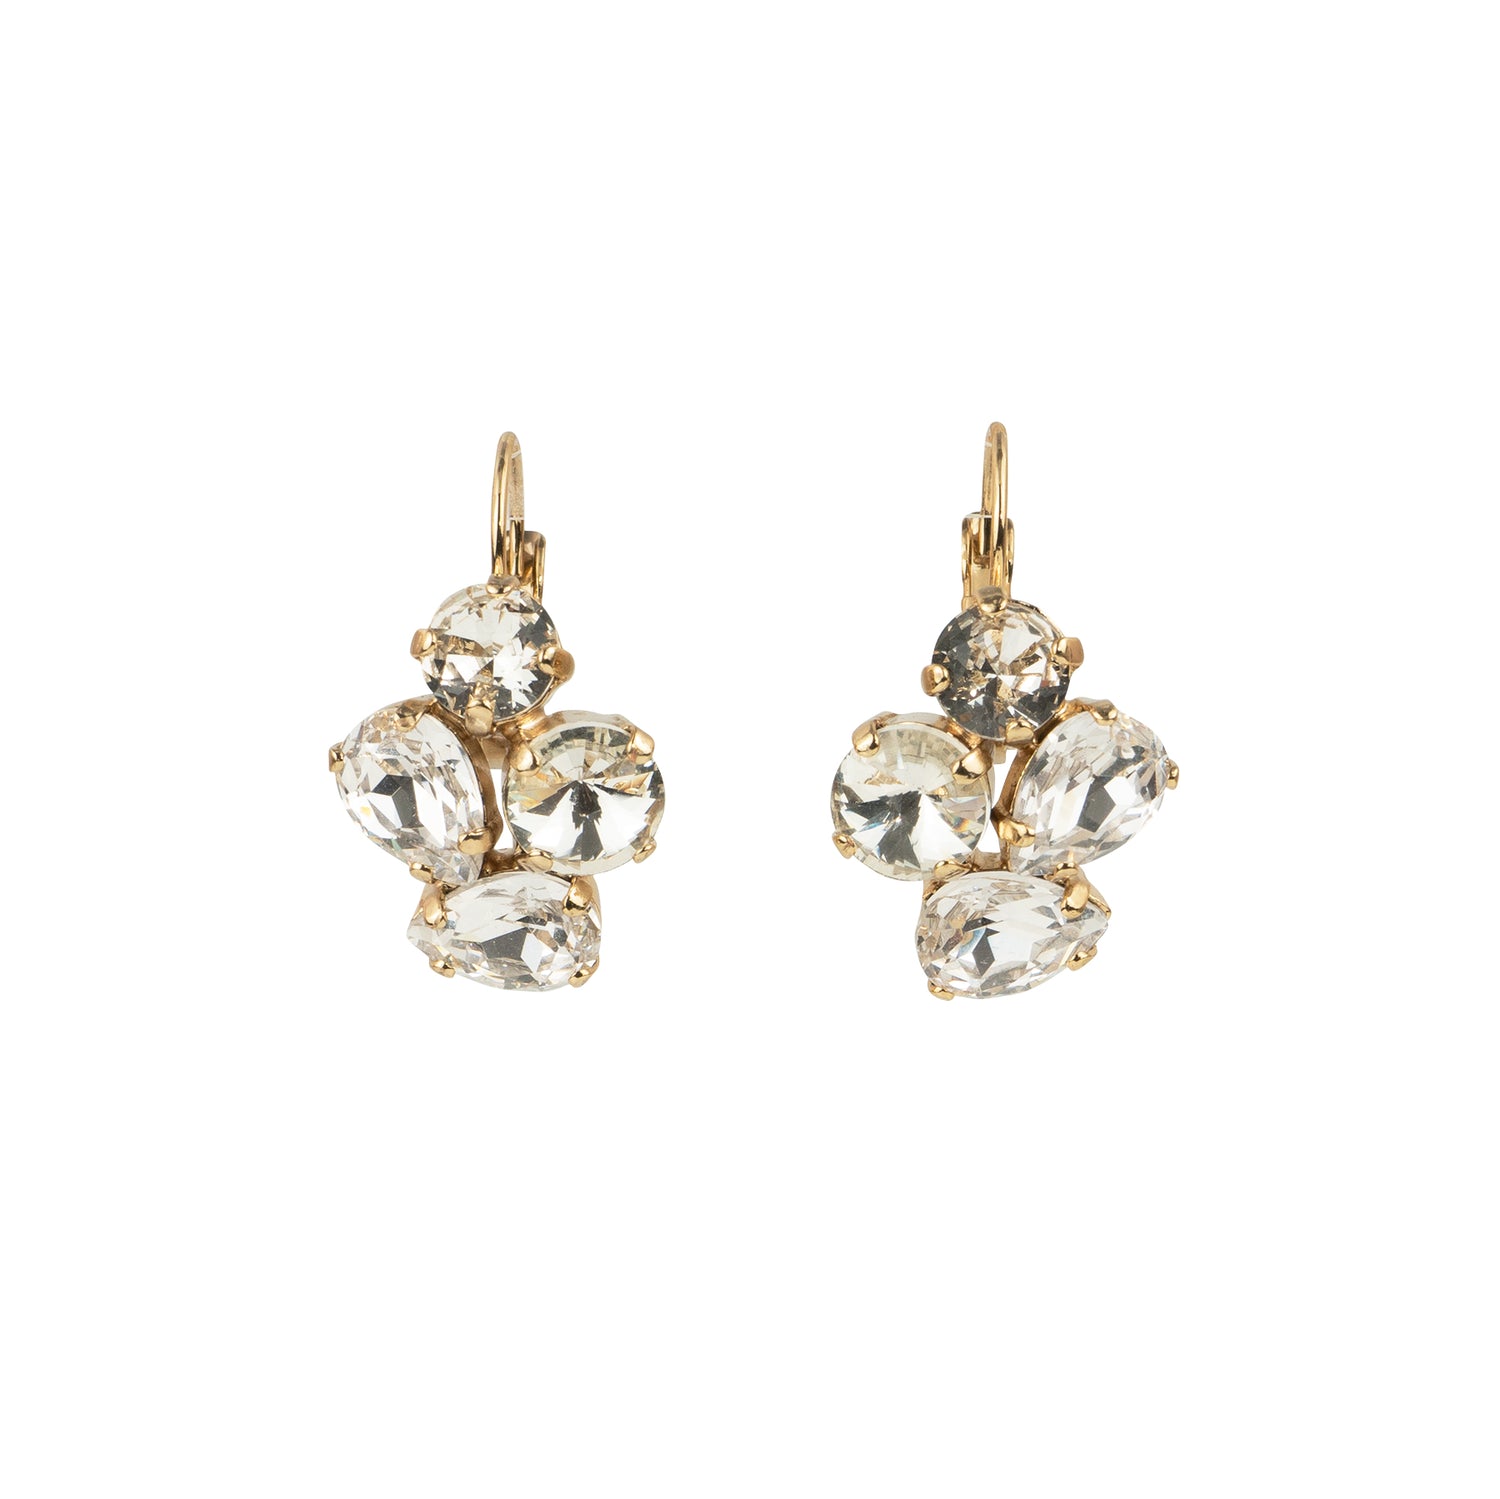 Lever earrings with crystal drops